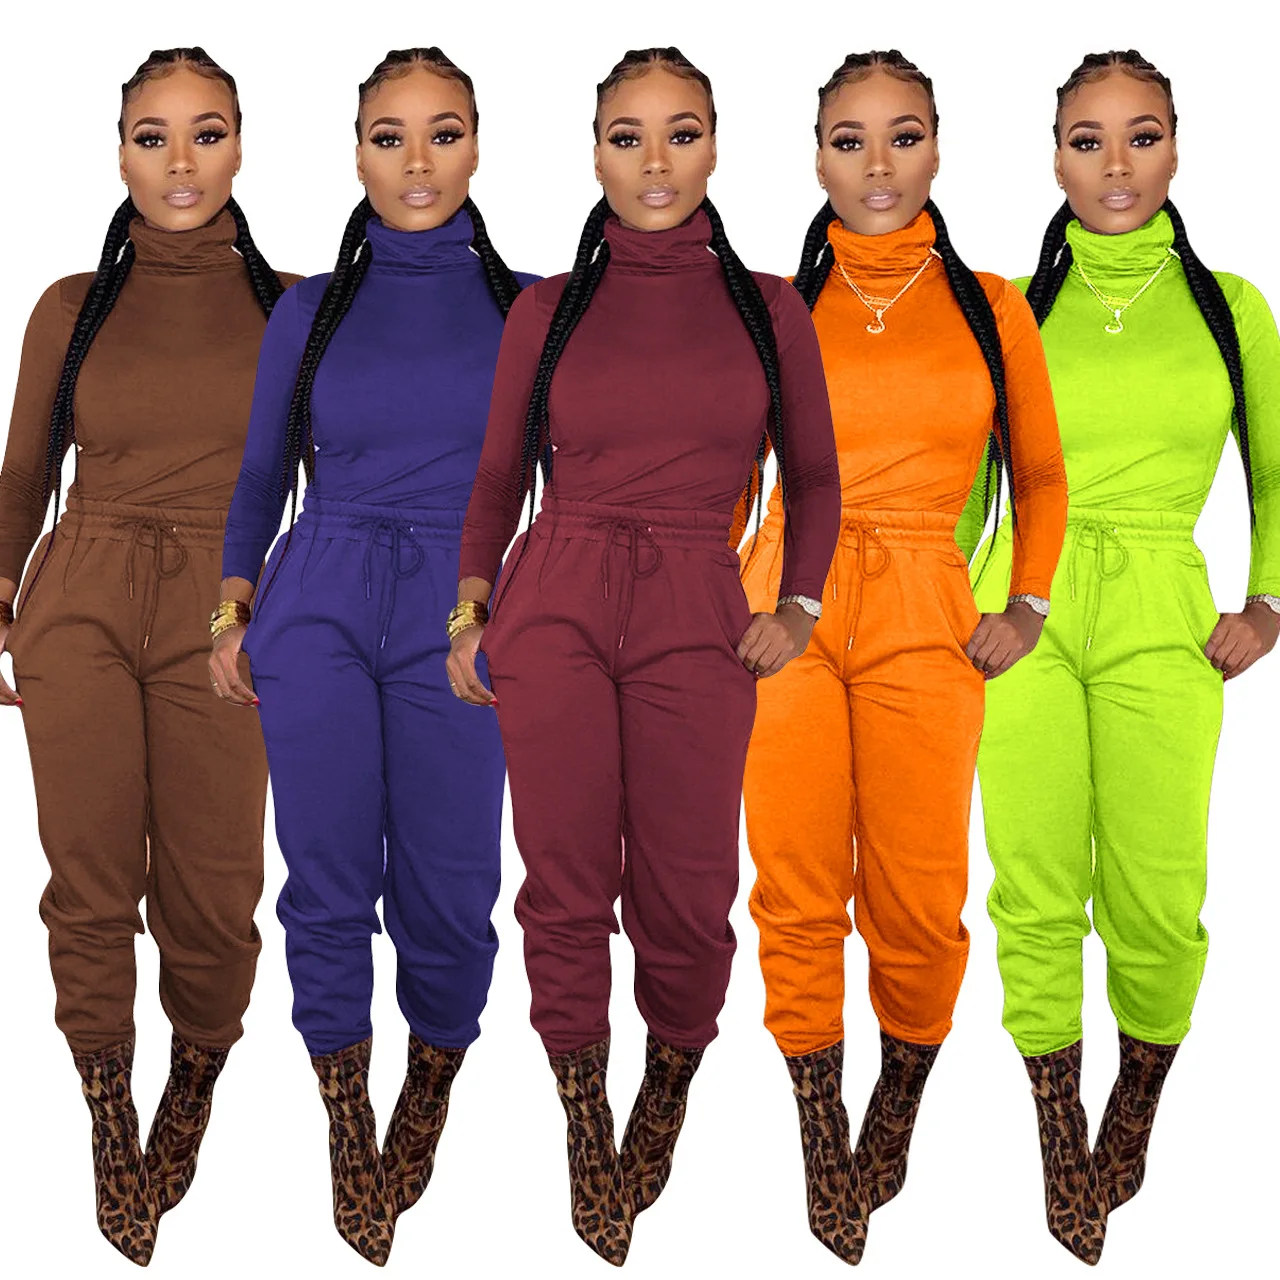 

Women Two Piece Set Long Sleeve Shirt Turtleneck Top + Flare Pants Casual Joggers Pants Tracksuits, Available